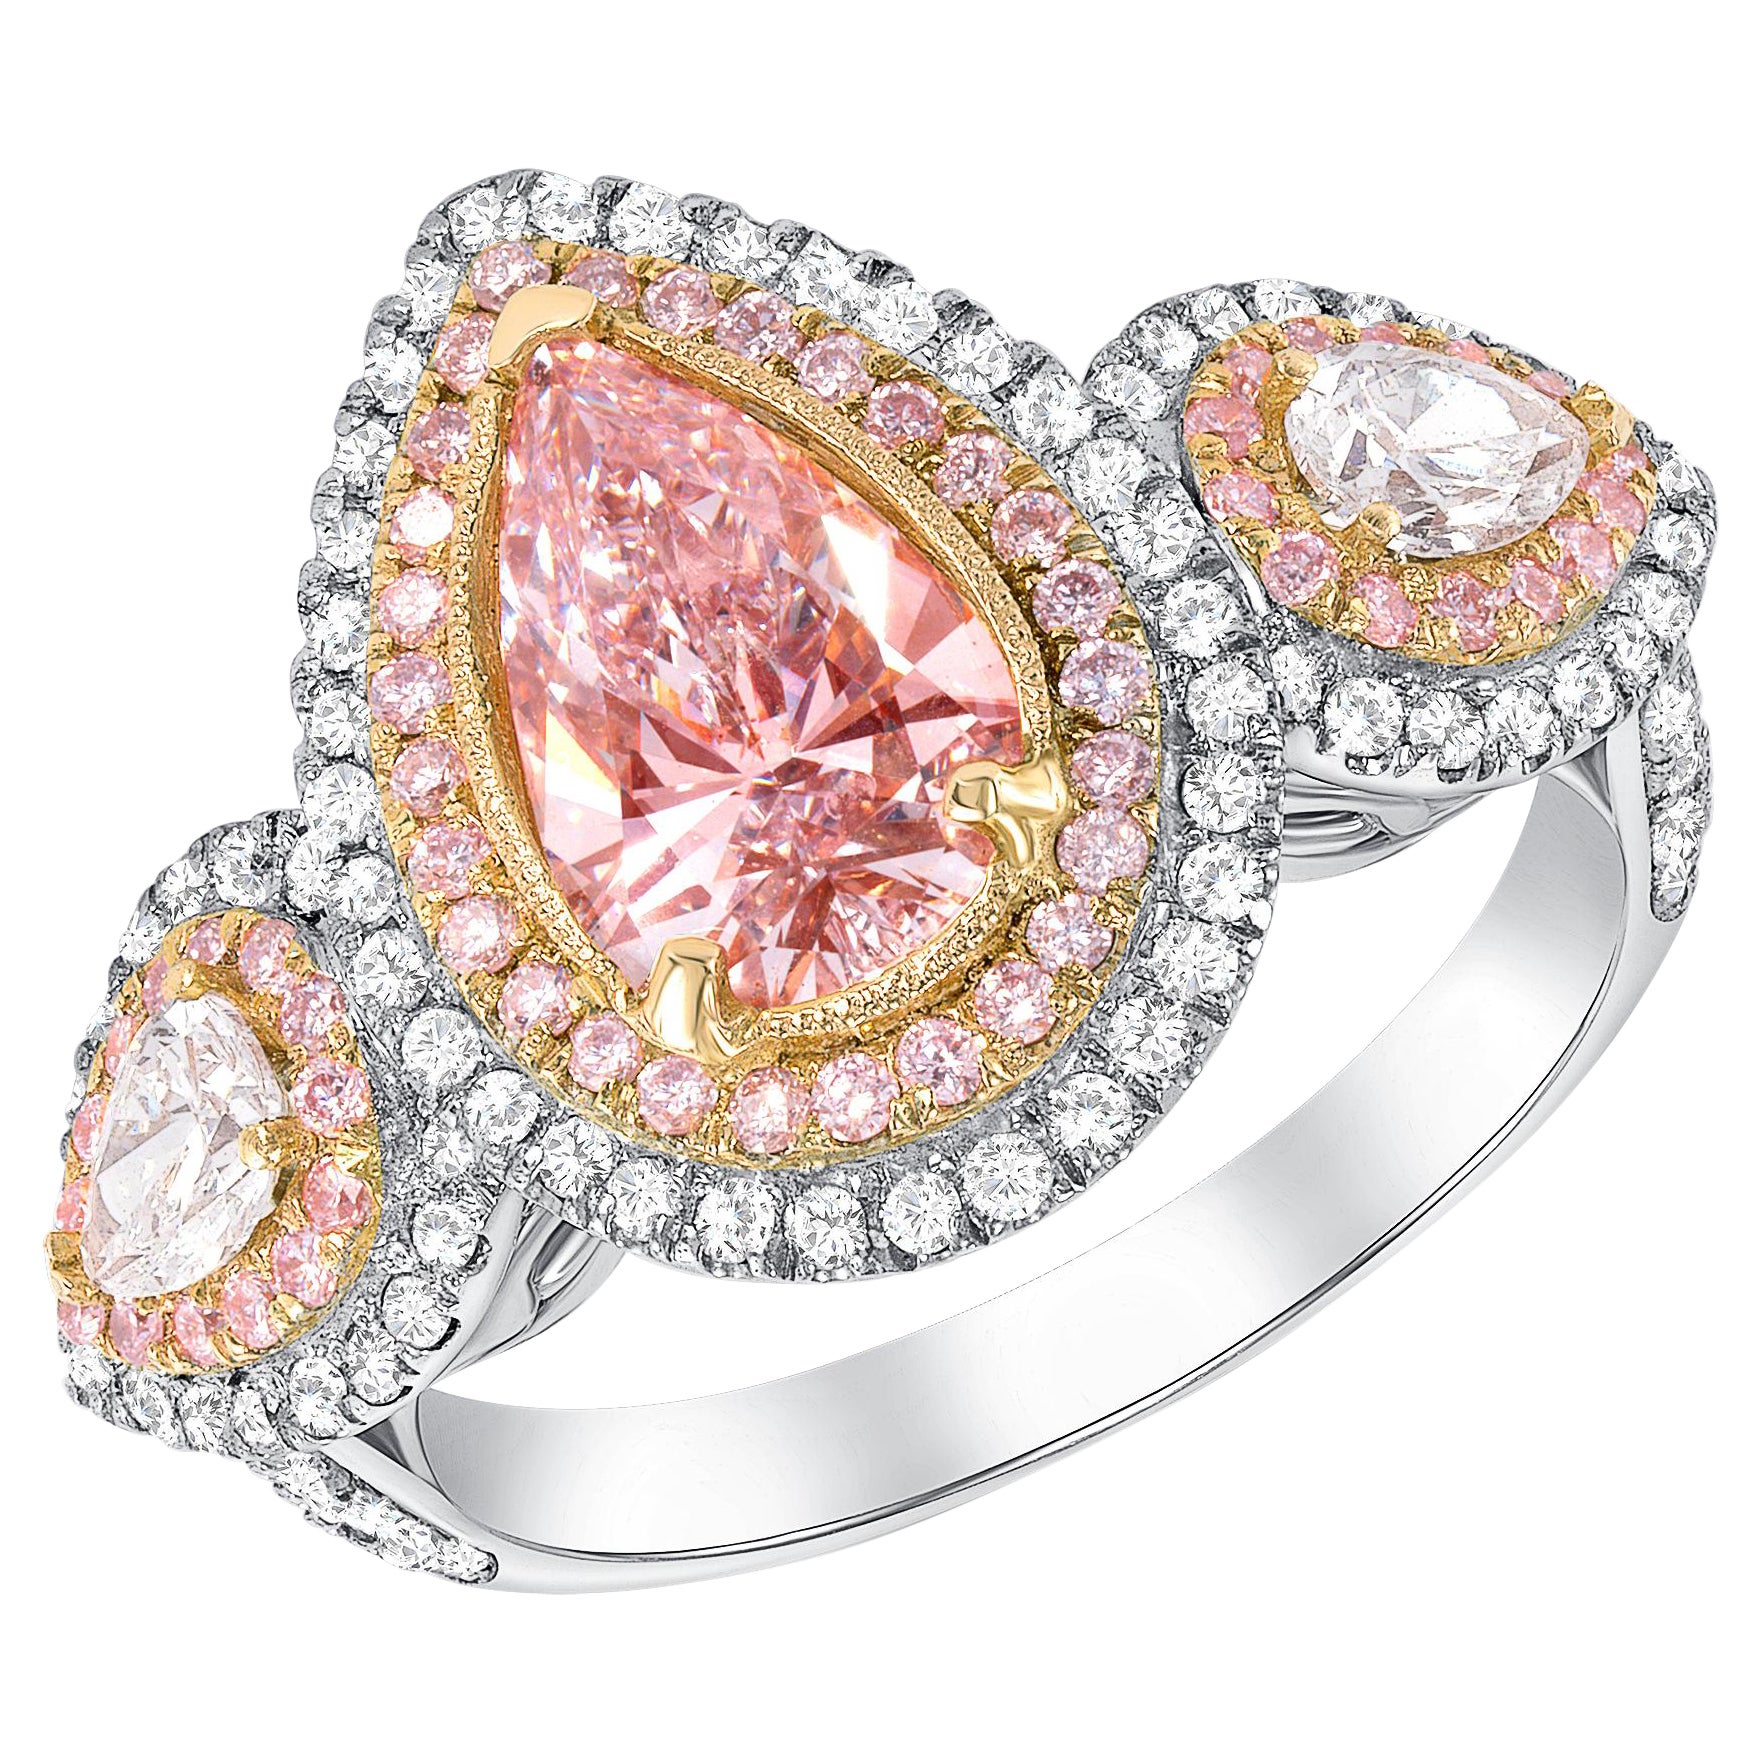 2.55 Carat 3 Stone Fancy Light Pink Pear Shaped Diamond Engagement Ring For Sale